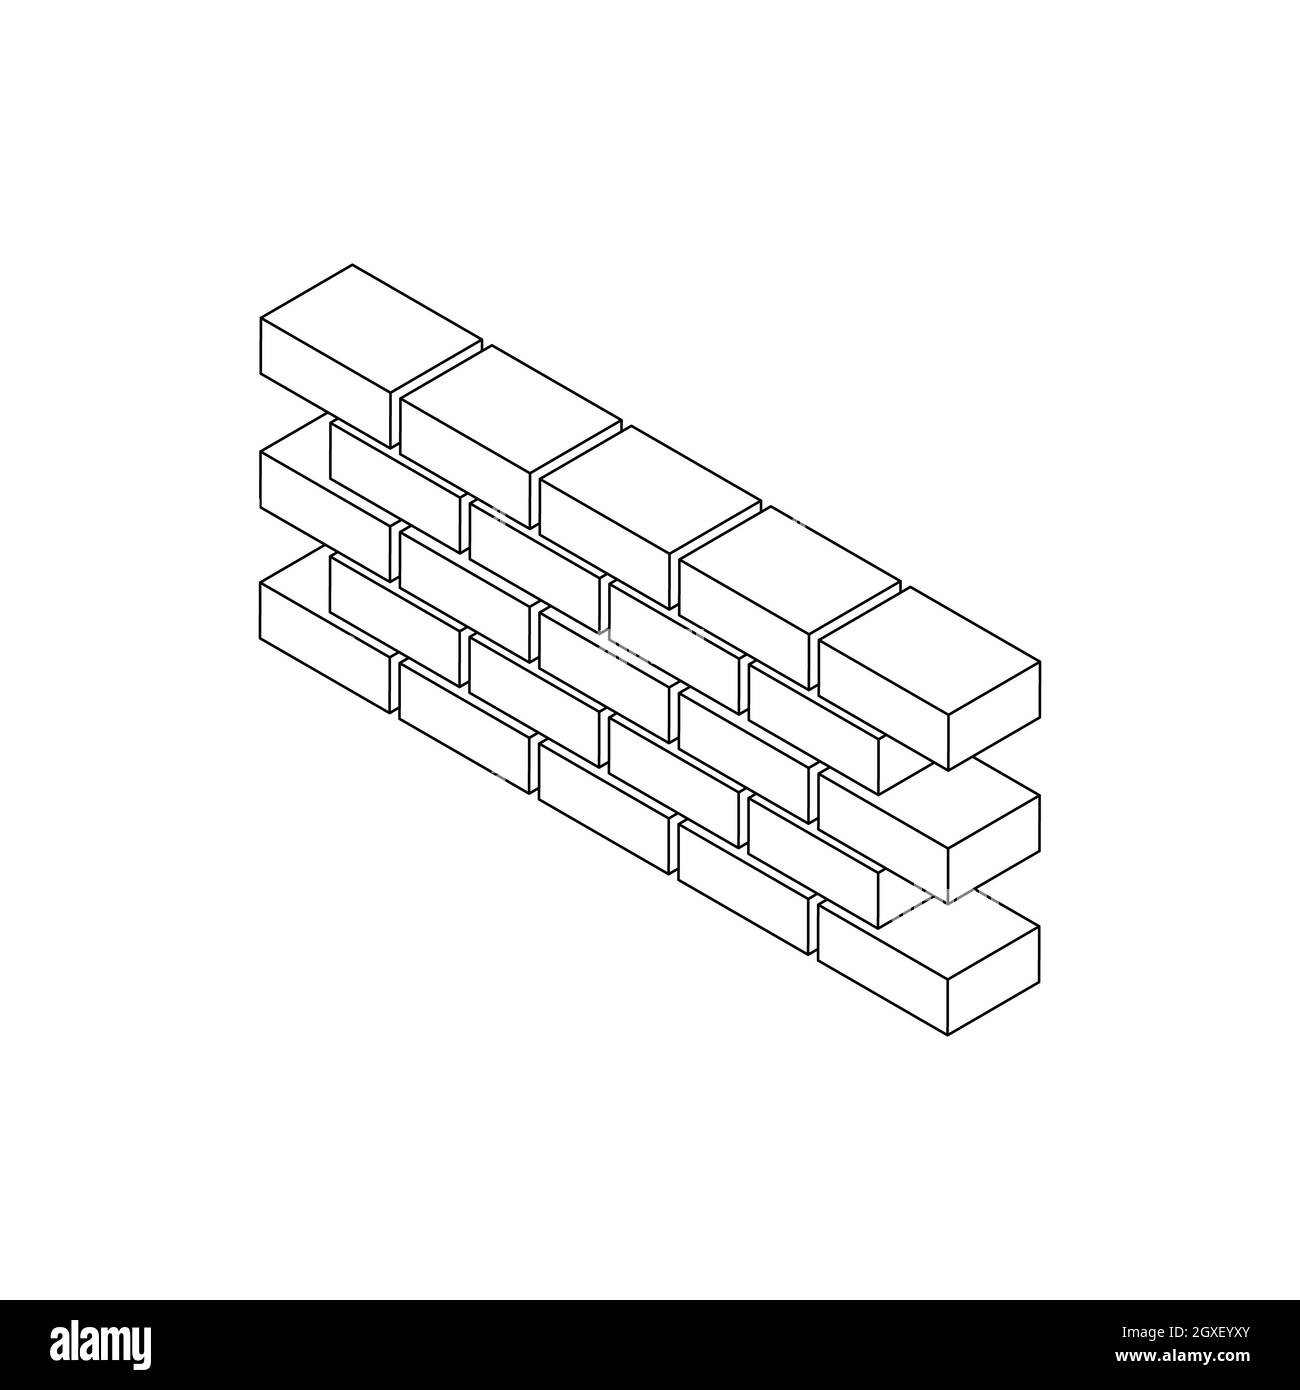 Part of brick wall icon in isometric 3d style on a white background Stock Photo